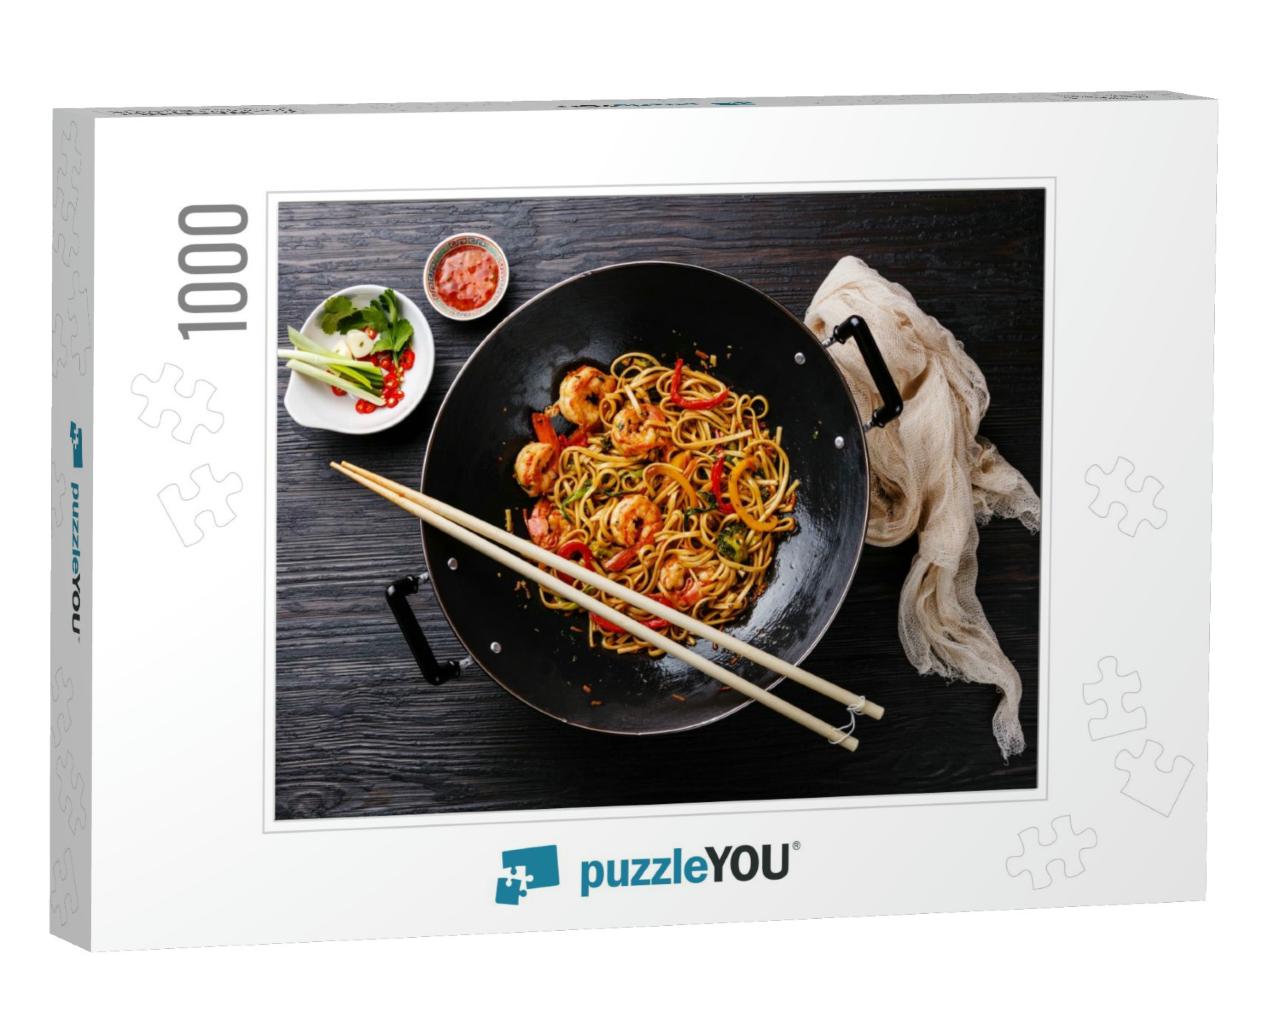 Udon Stir-Fry Noodles with Shrimp & Vegetables in Wok Pan... Jigsaw Puzzle with 1000 pieces